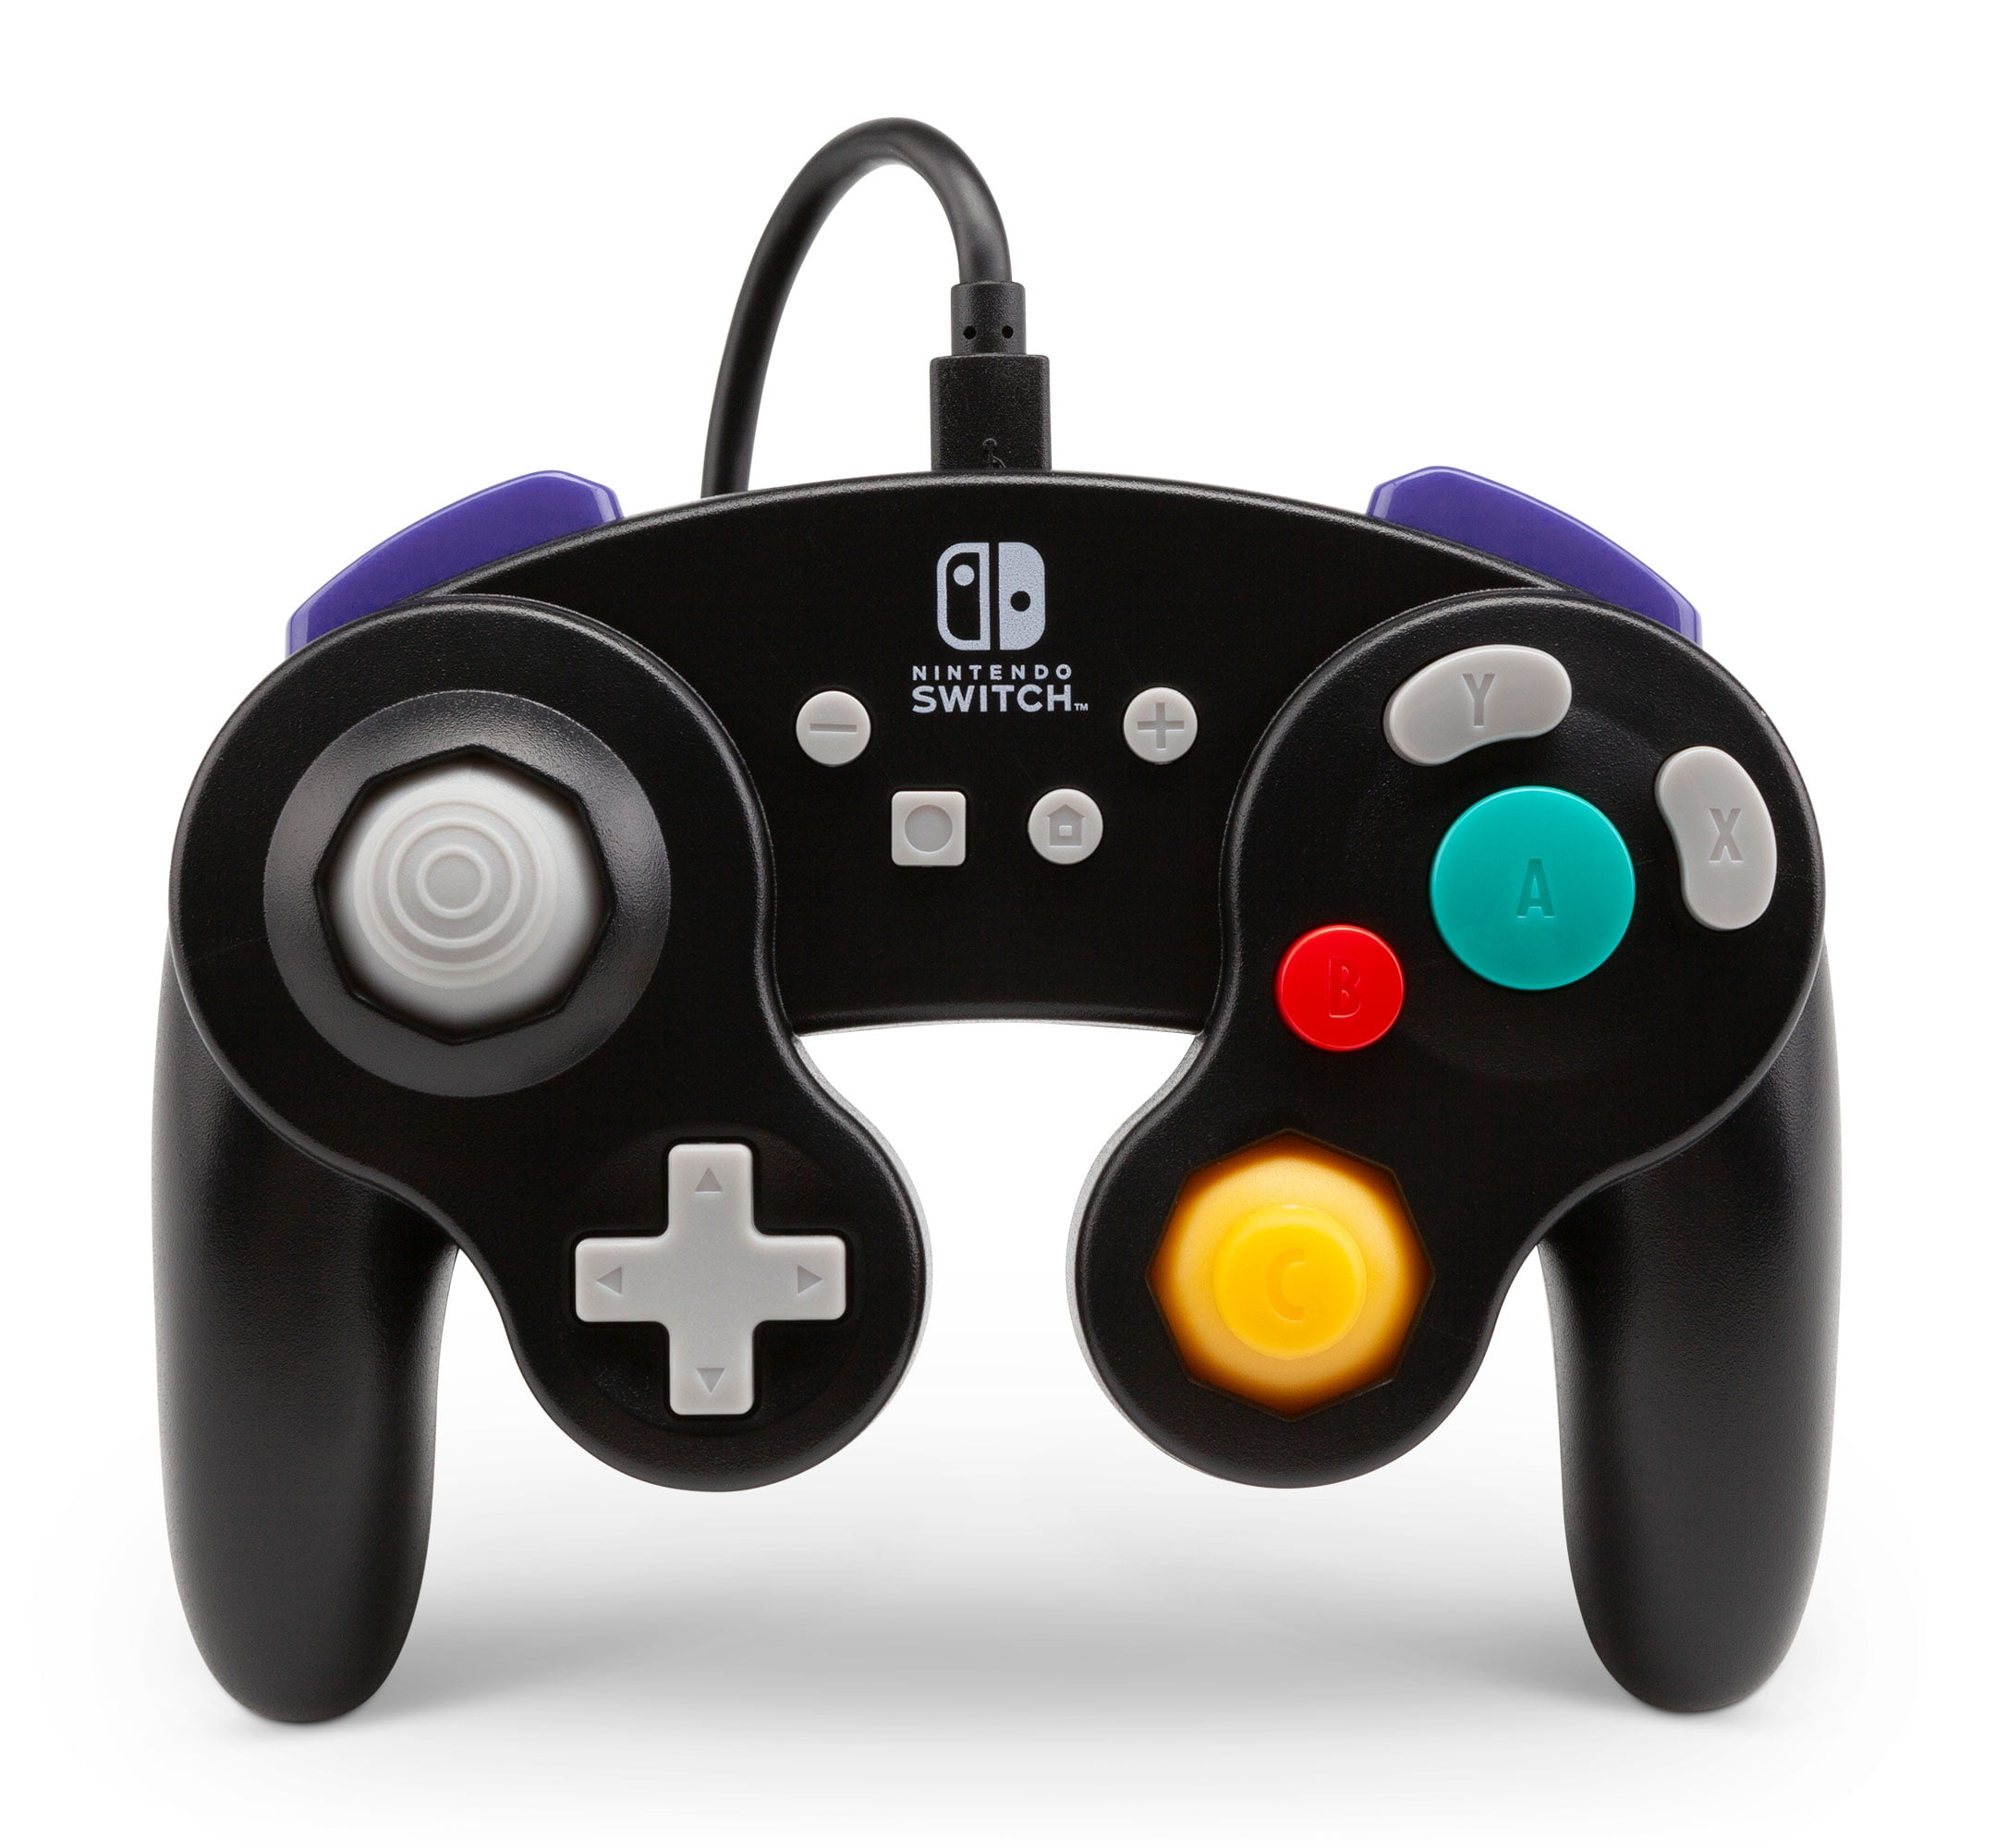 PowerA GameCube Style Wired Controller for Nintendo Switch - Black